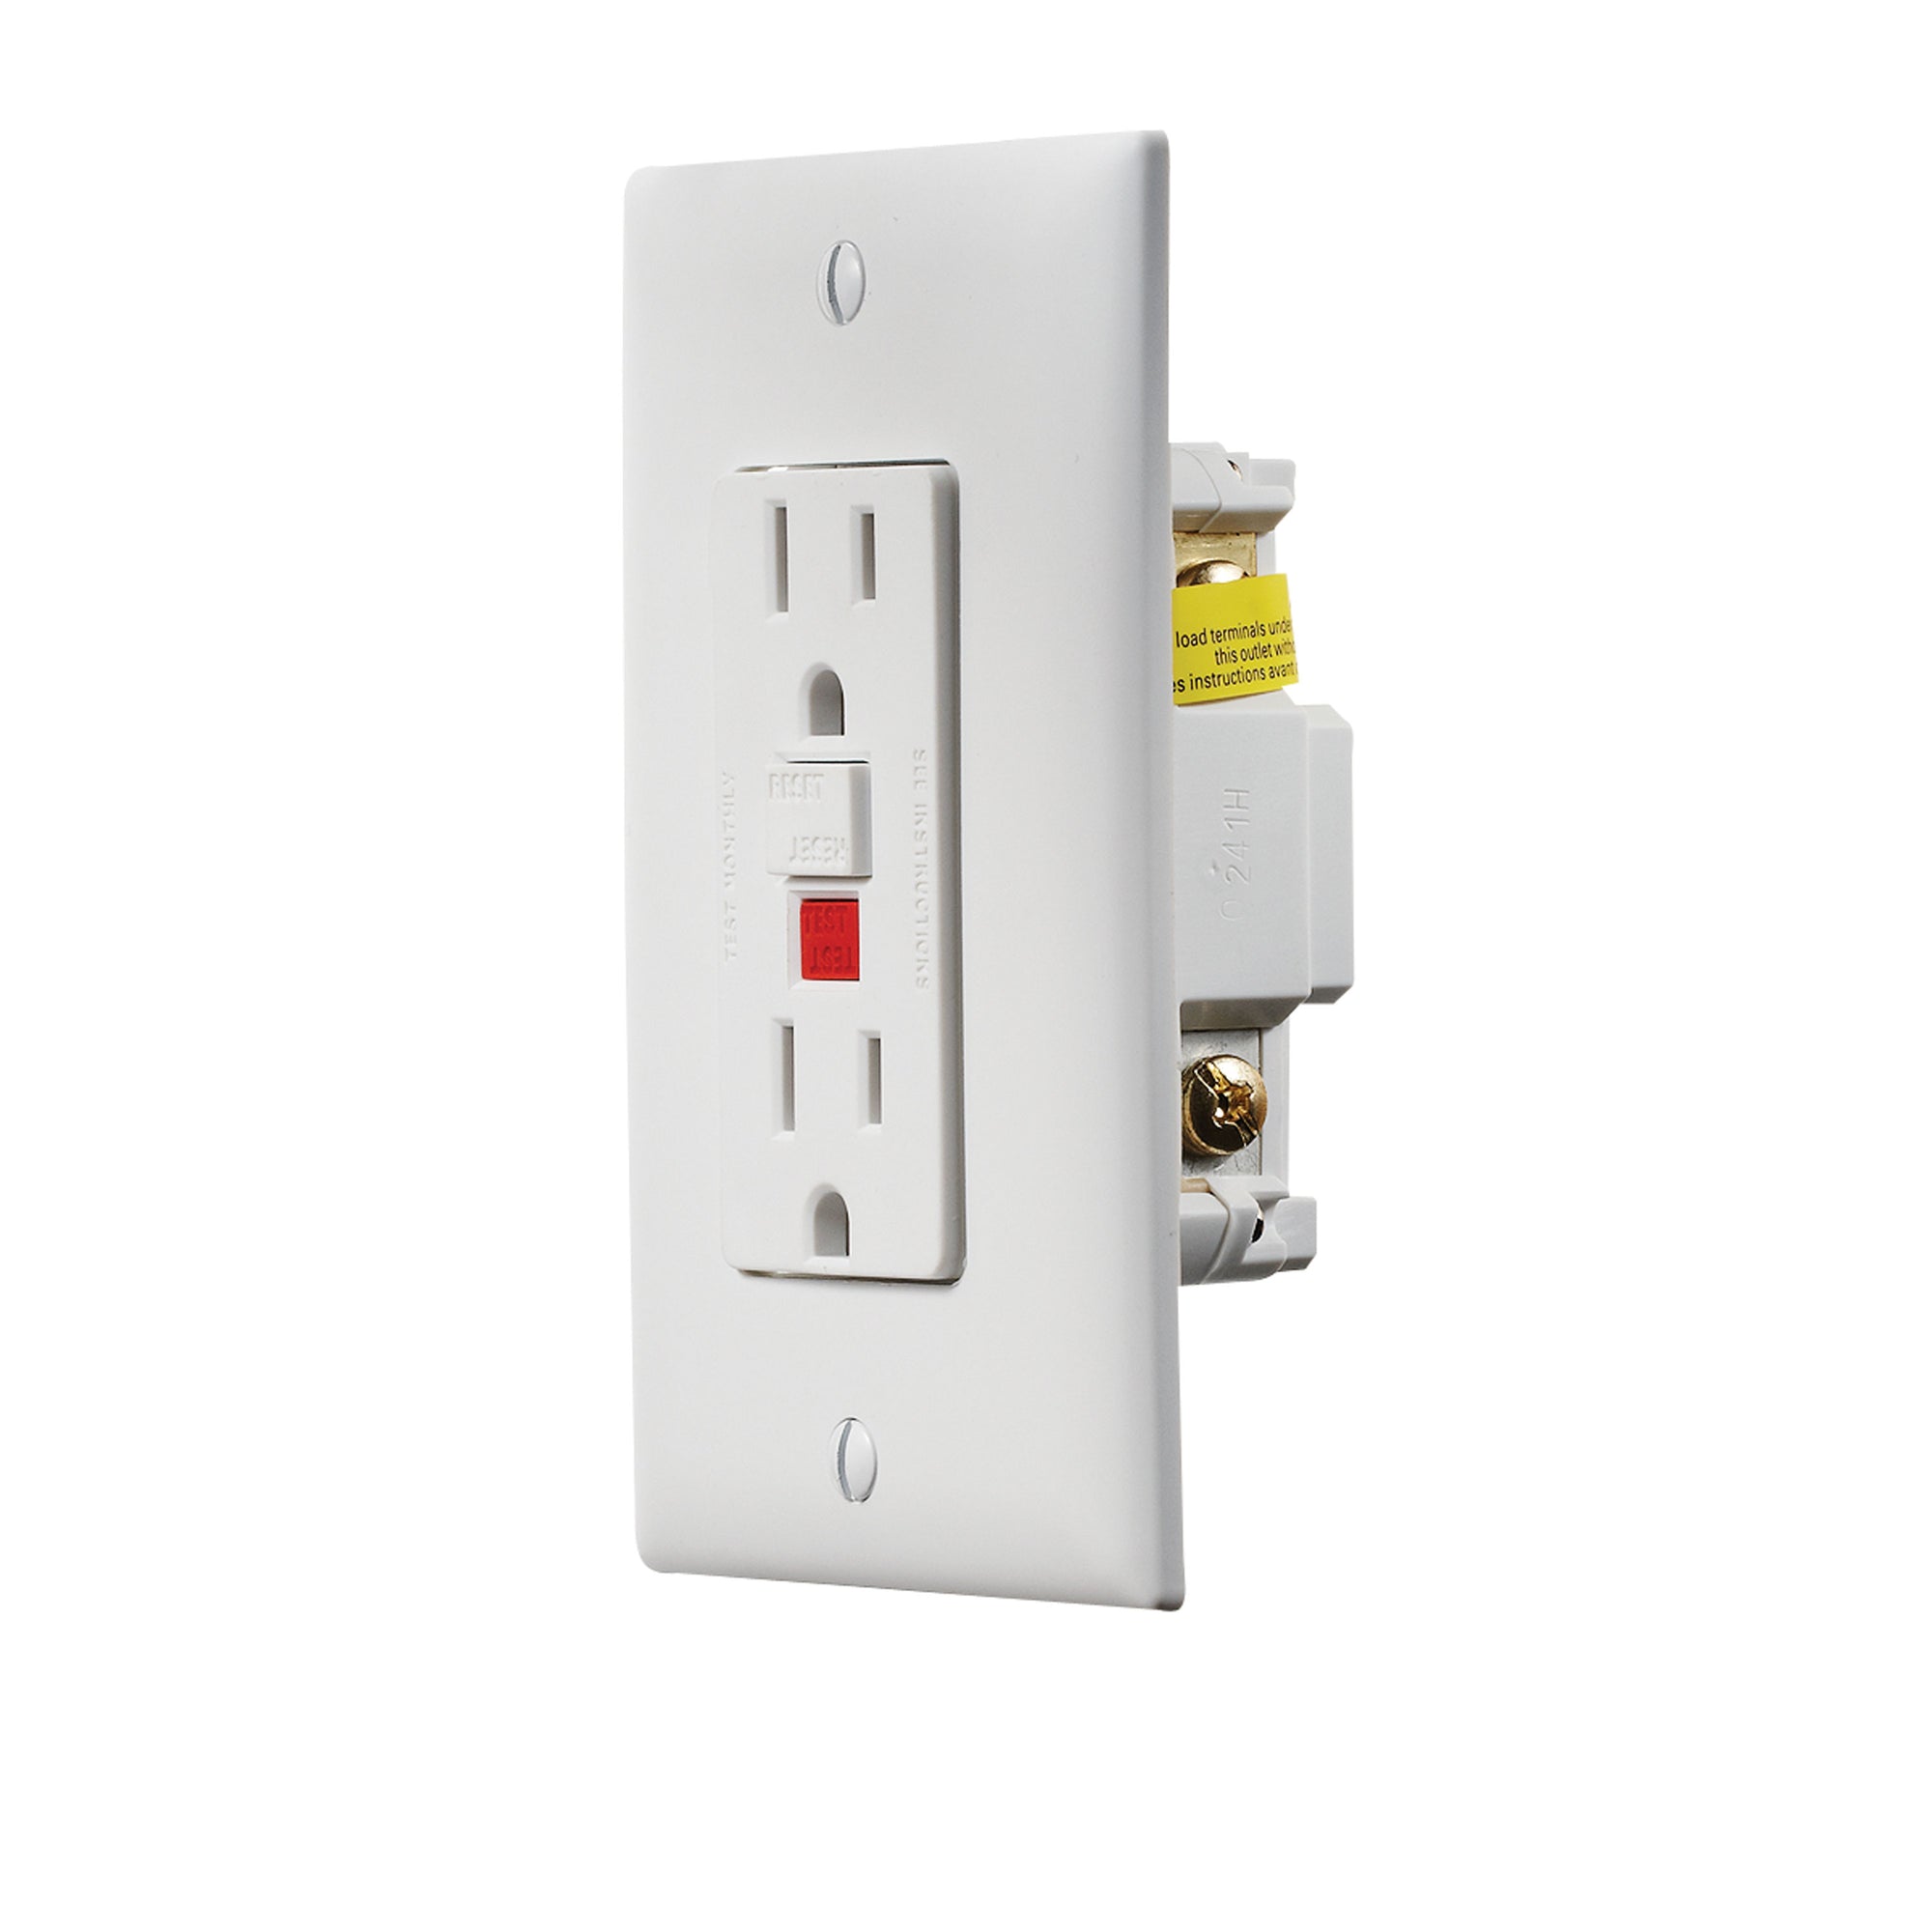 RV Designer S801 Dual AC GFCI Outlet with Cover-Plate - White